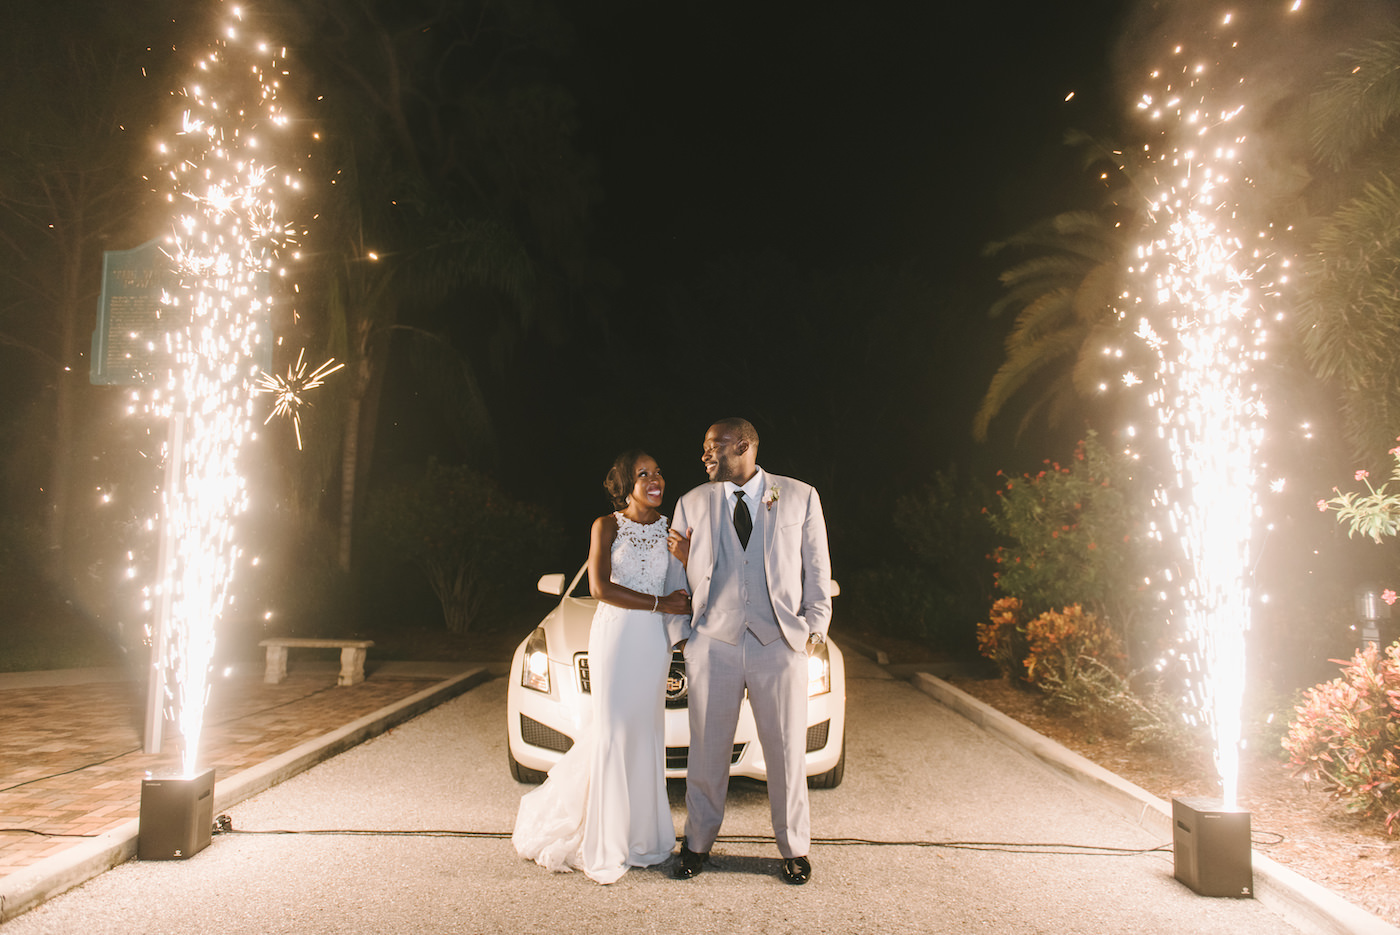 Sarasota Bride and Groom Sparkler Fountain Lighting Wedding Exit Spark Wedding Events | Florida Wedding Photographer Kera Photography | Tampa Bay Wedding Planner Special Moments Event Planning